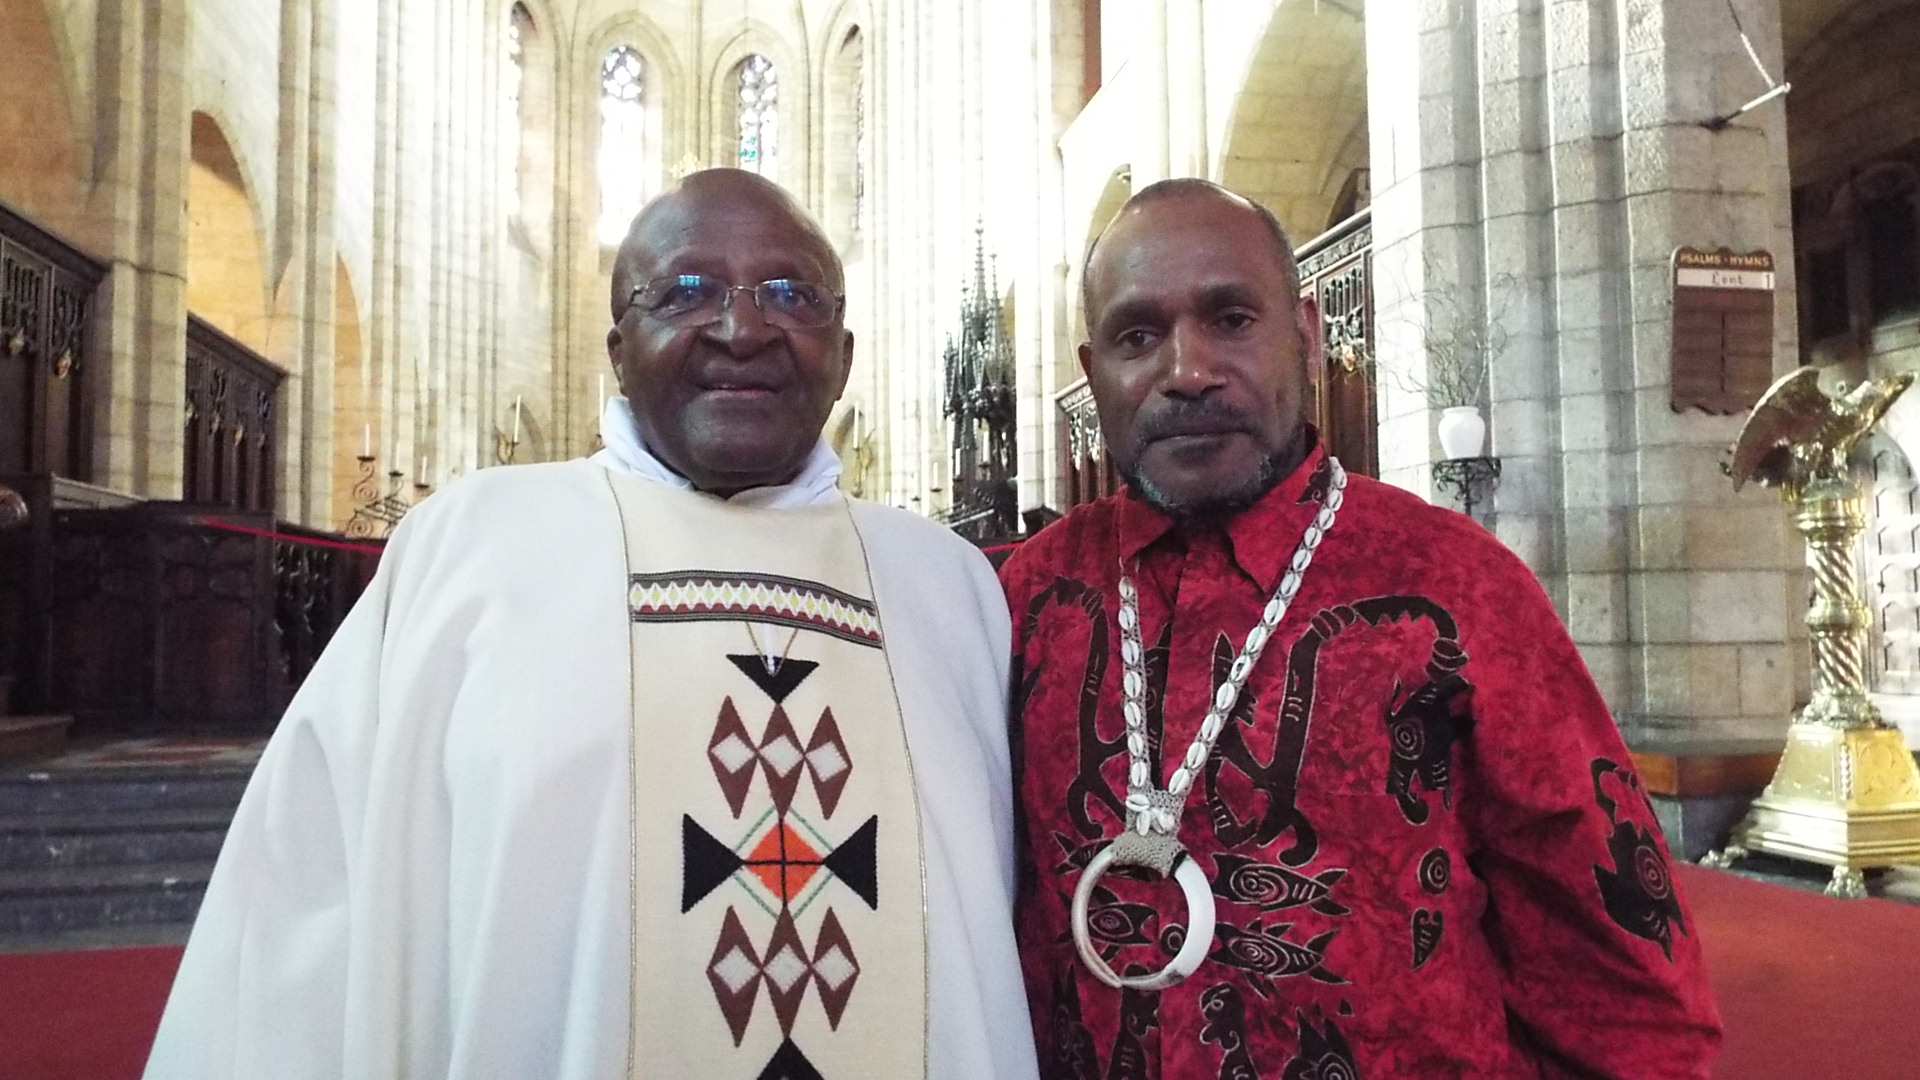 Archbishop Emeritus Desmond Tutu meets with Benny, renews call for UN review of West Papuan self-determination